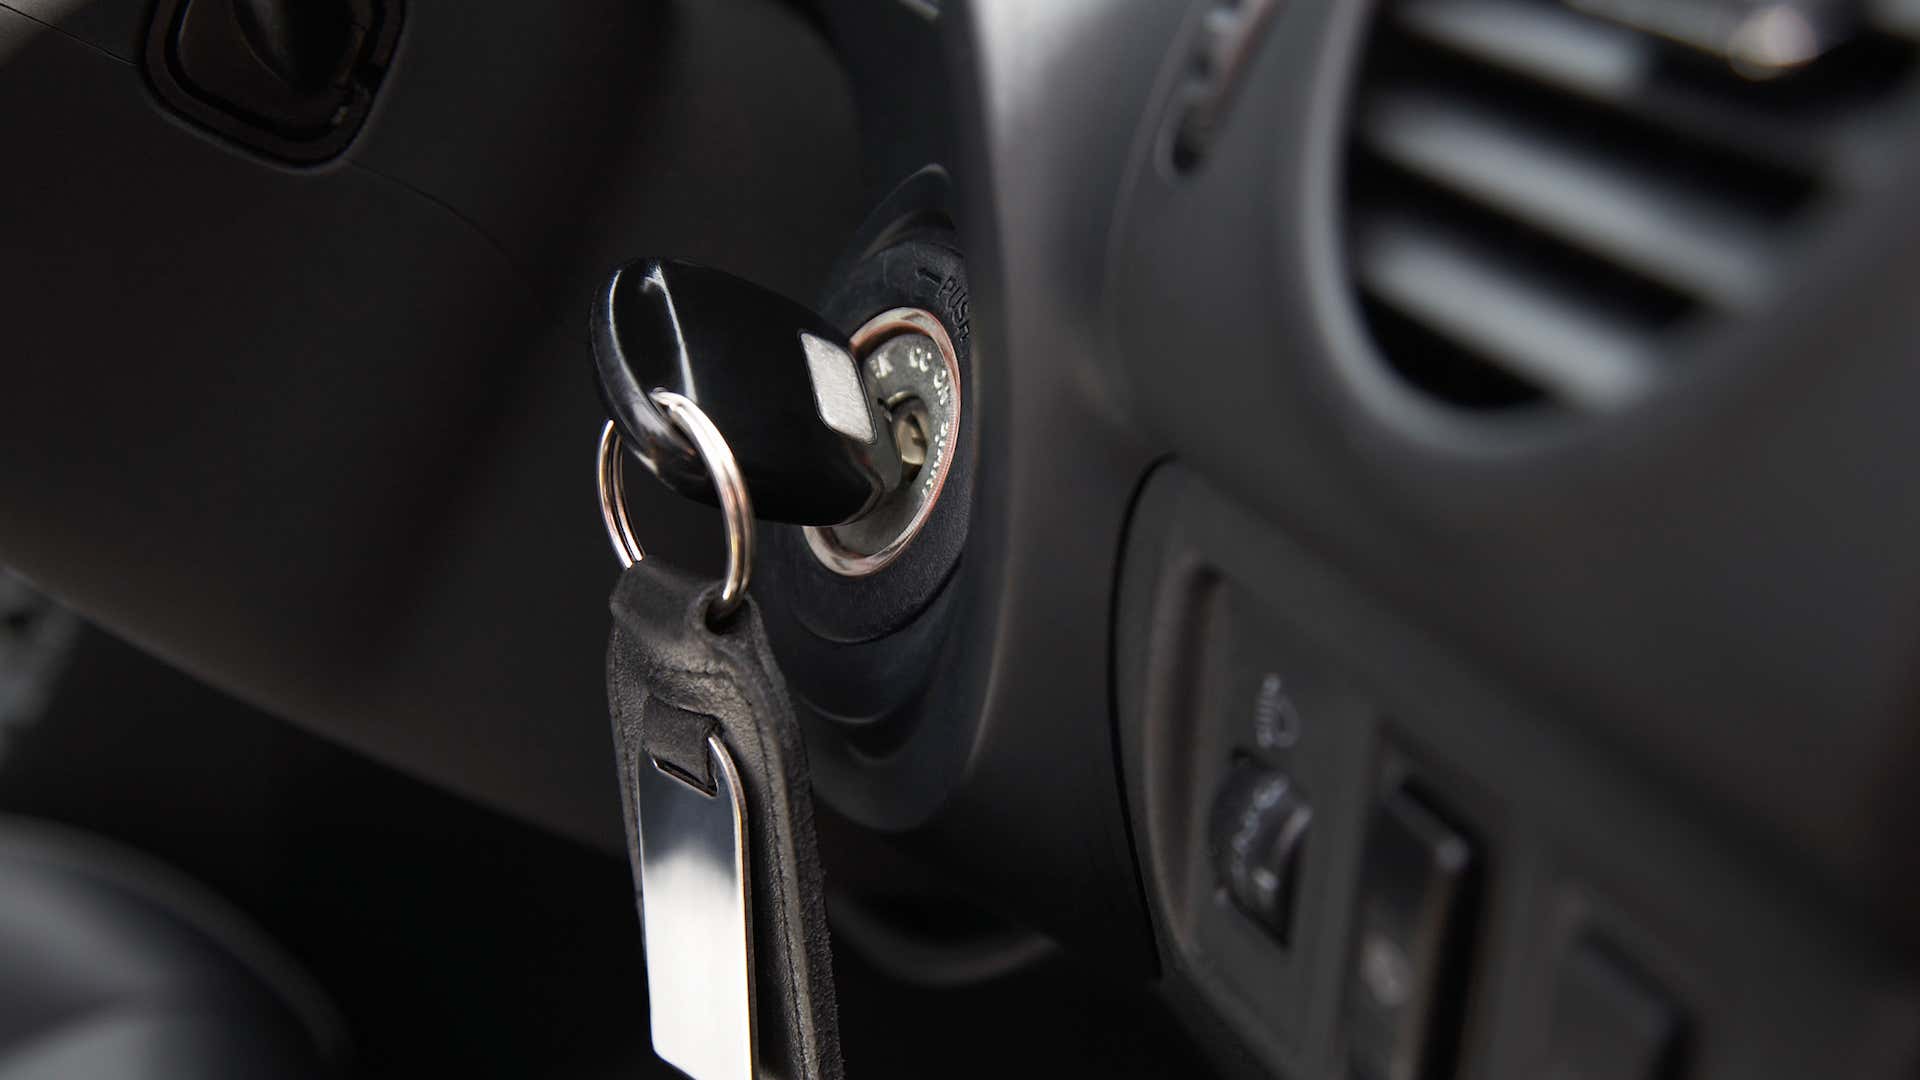 What To Do When Your Key is Stuck in the Ignition? The Drive